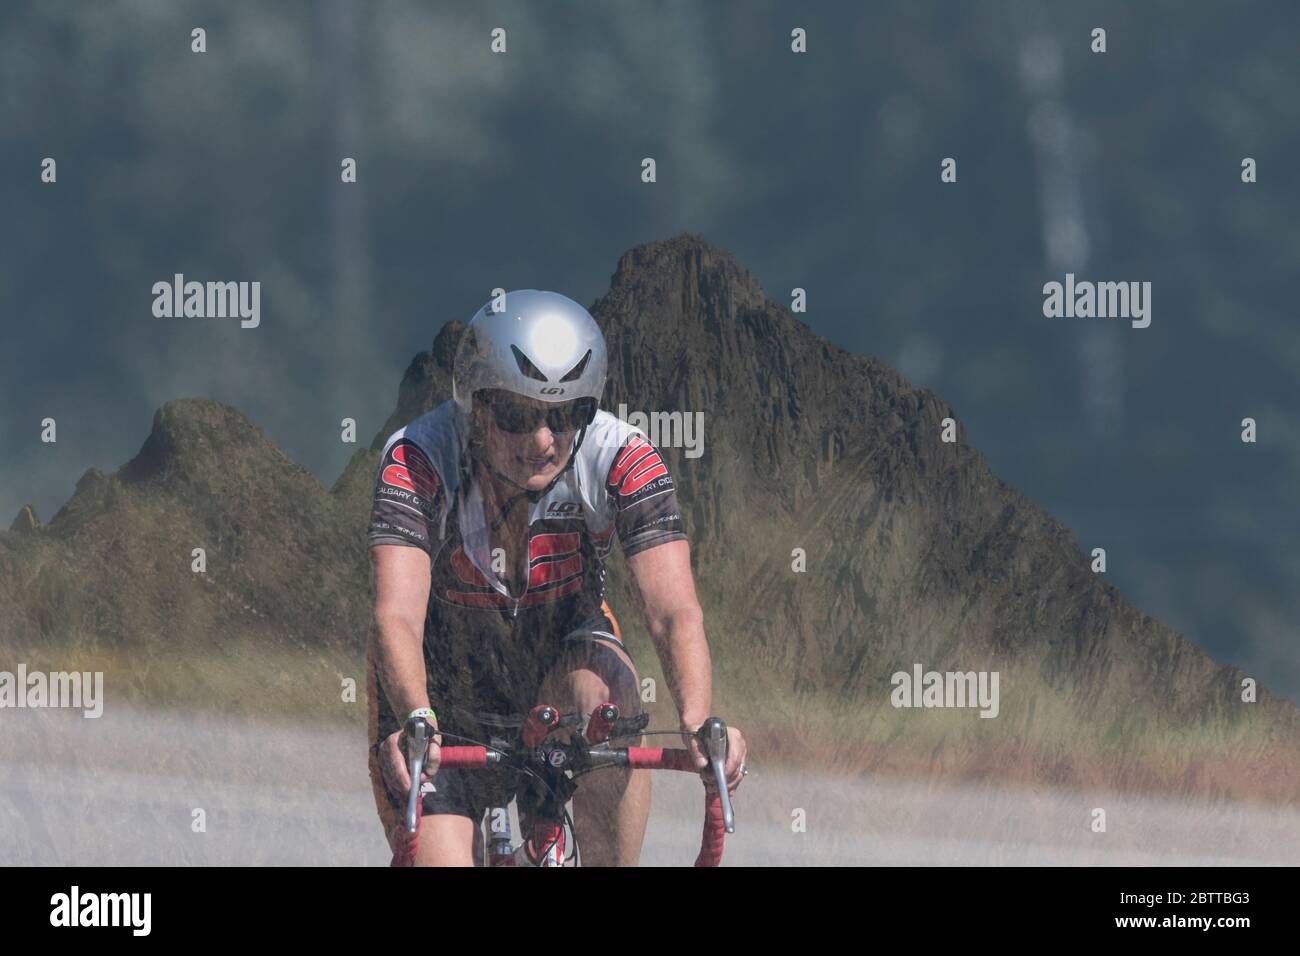 Scenic Bike Race, single rider, in full racing gear and uniform. Mountain background Stock Photo